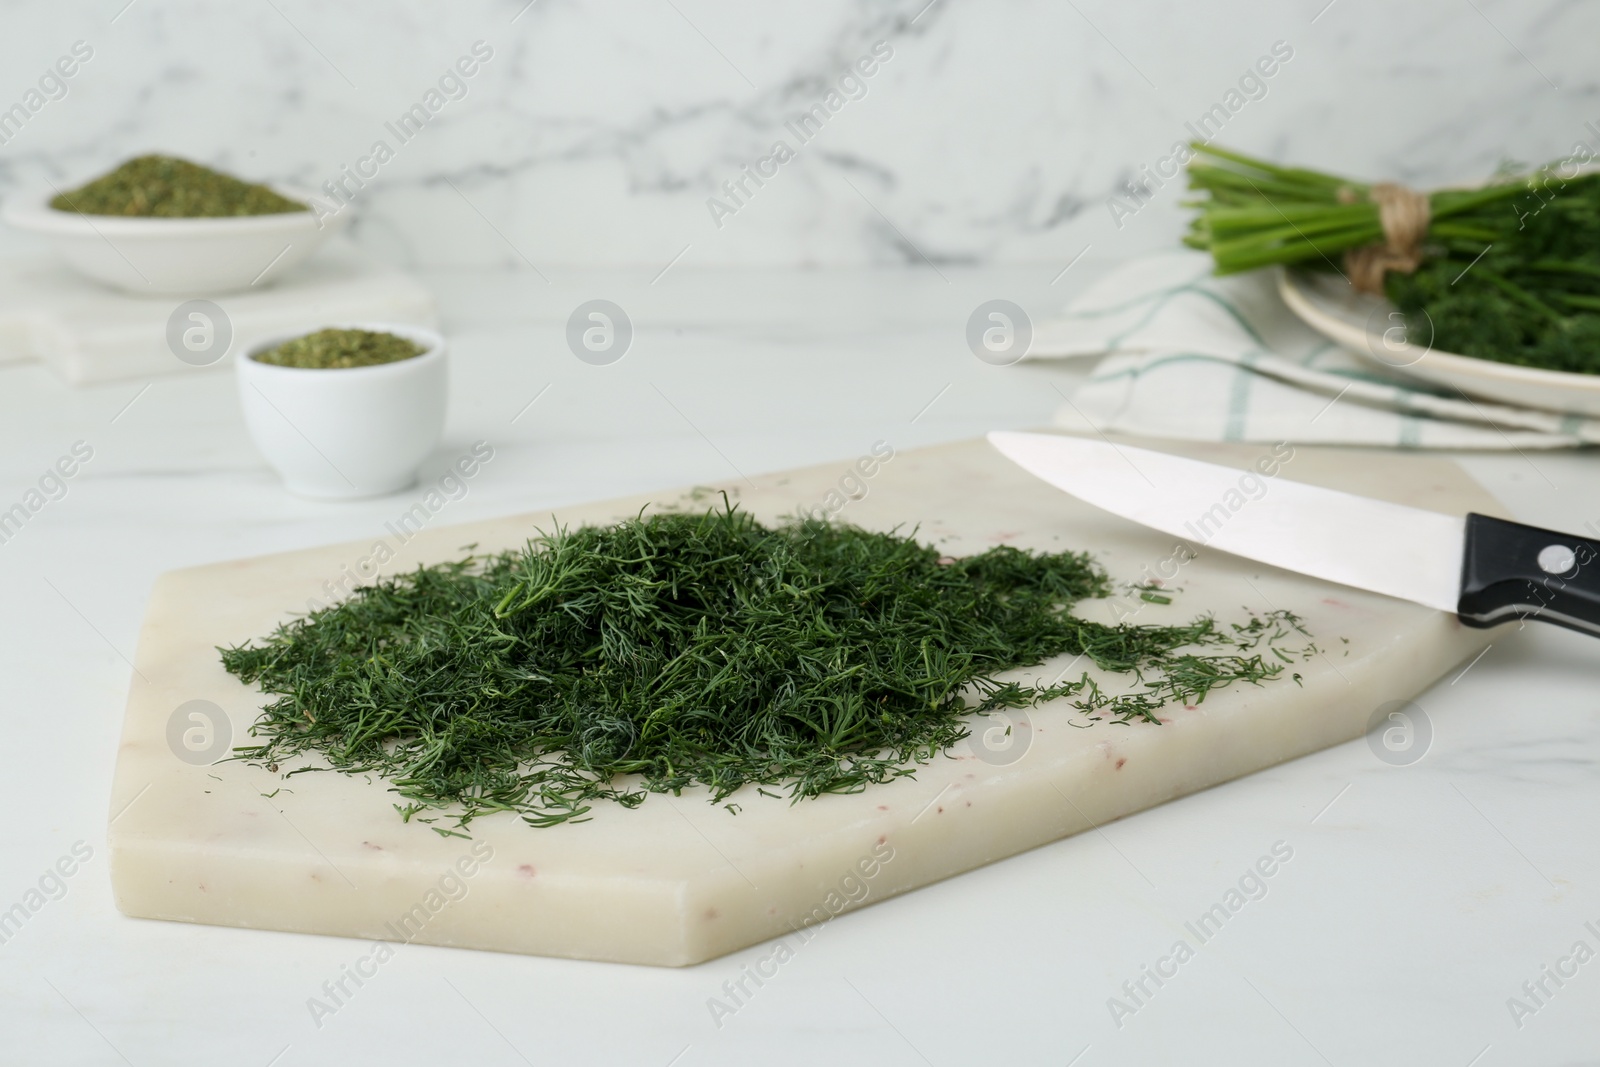 Photo of Fresh dill preparing for drying on white board